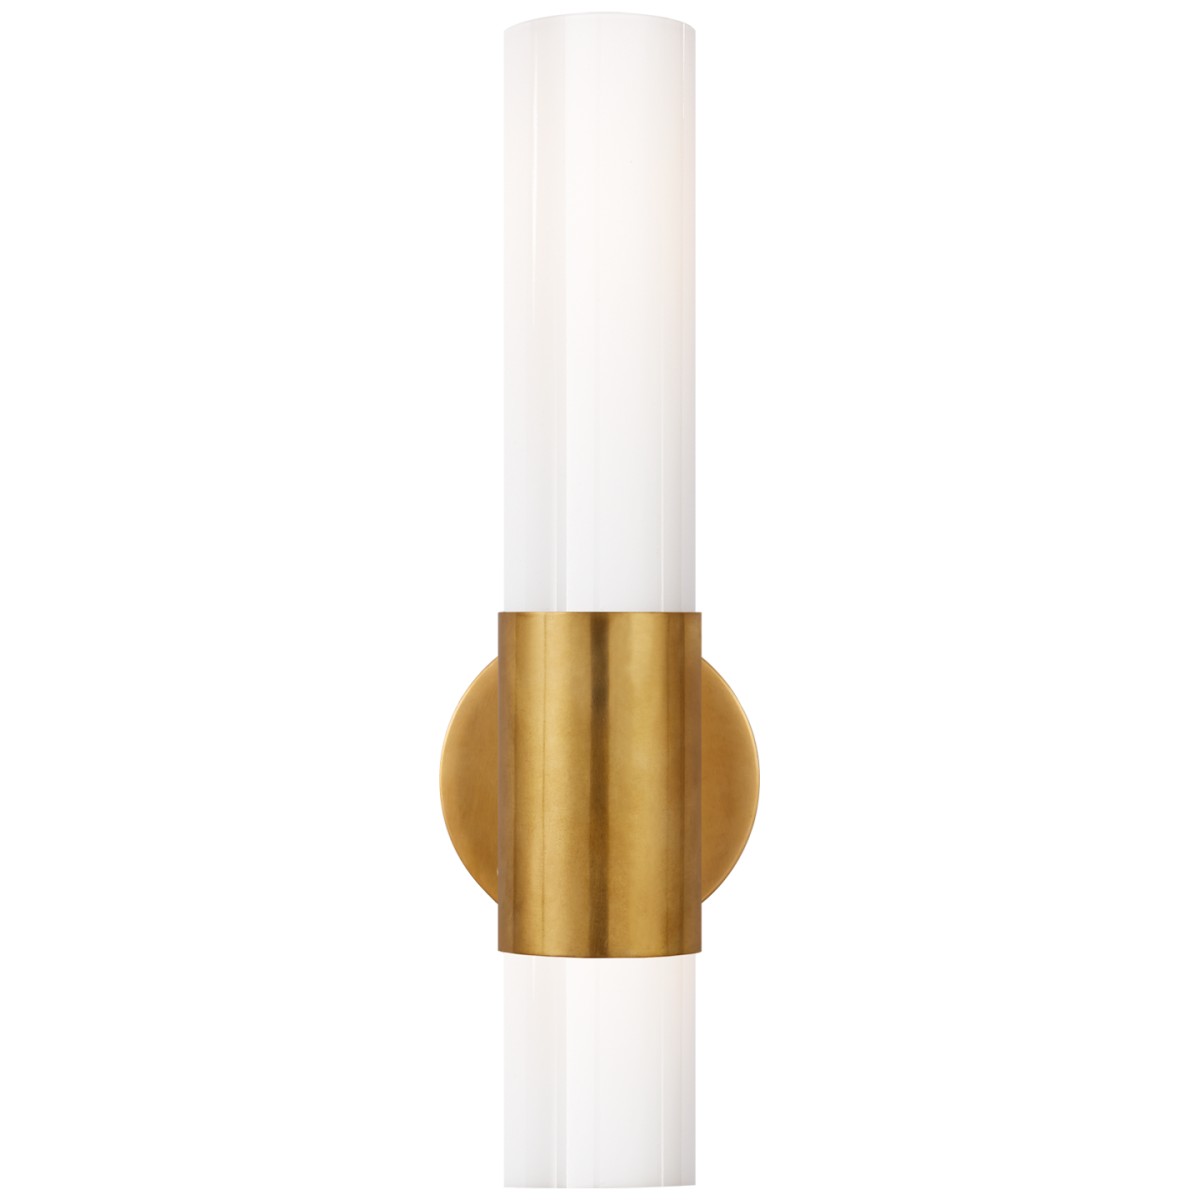 Penz Medium Cylindrical Sconce with White Glass